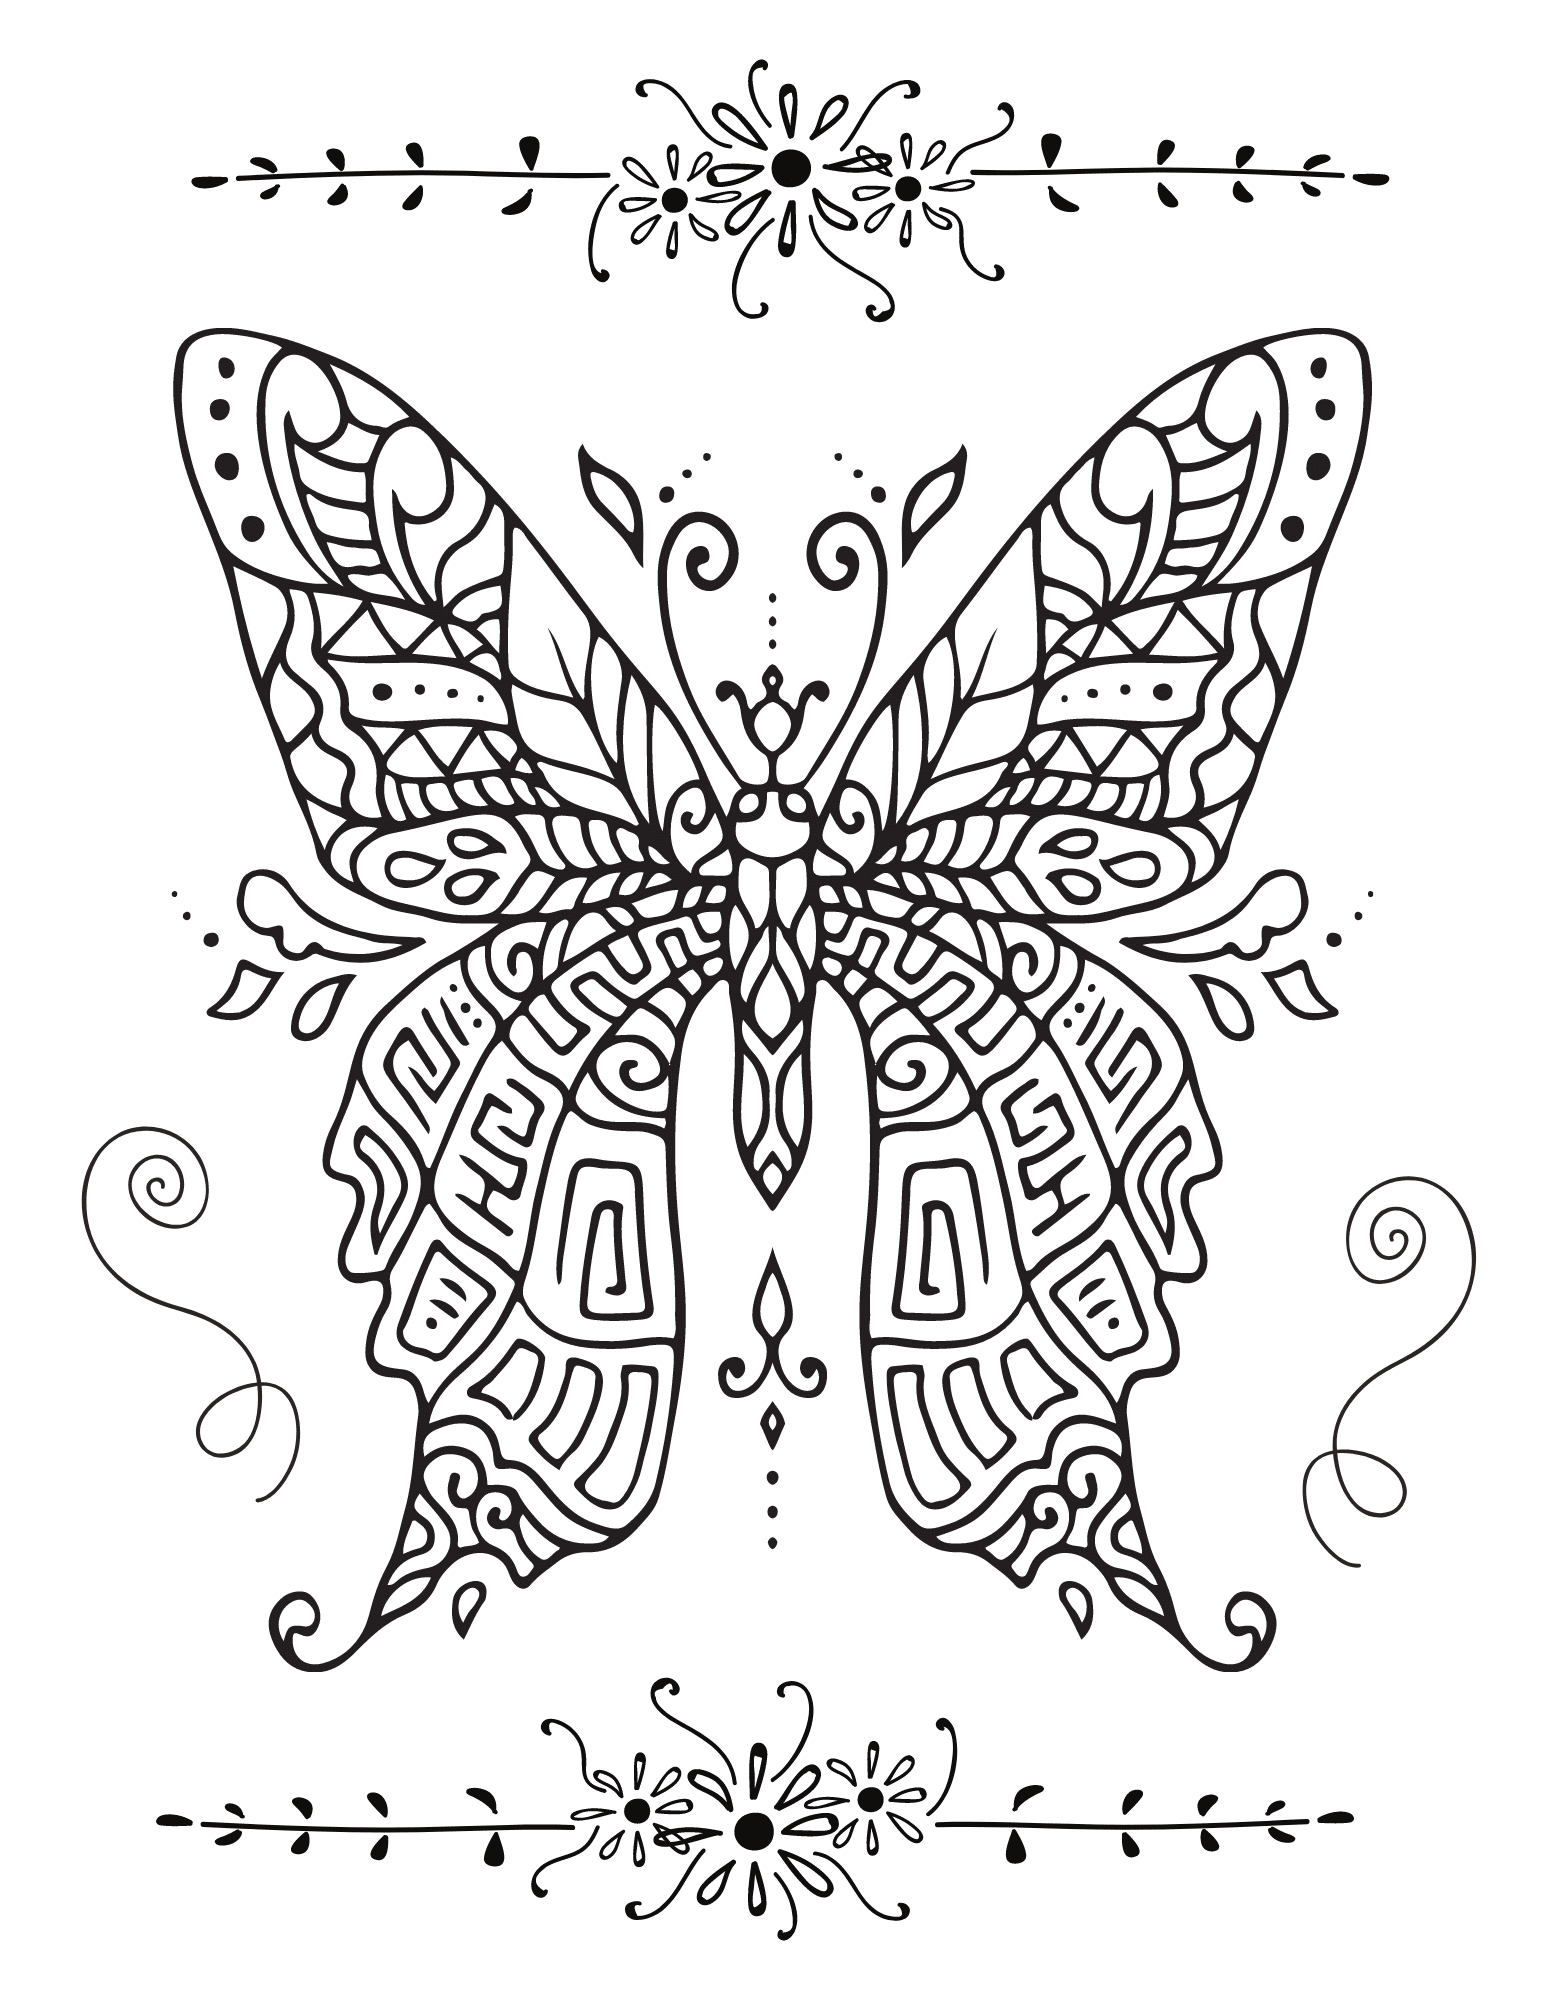 Colorable butterfly image